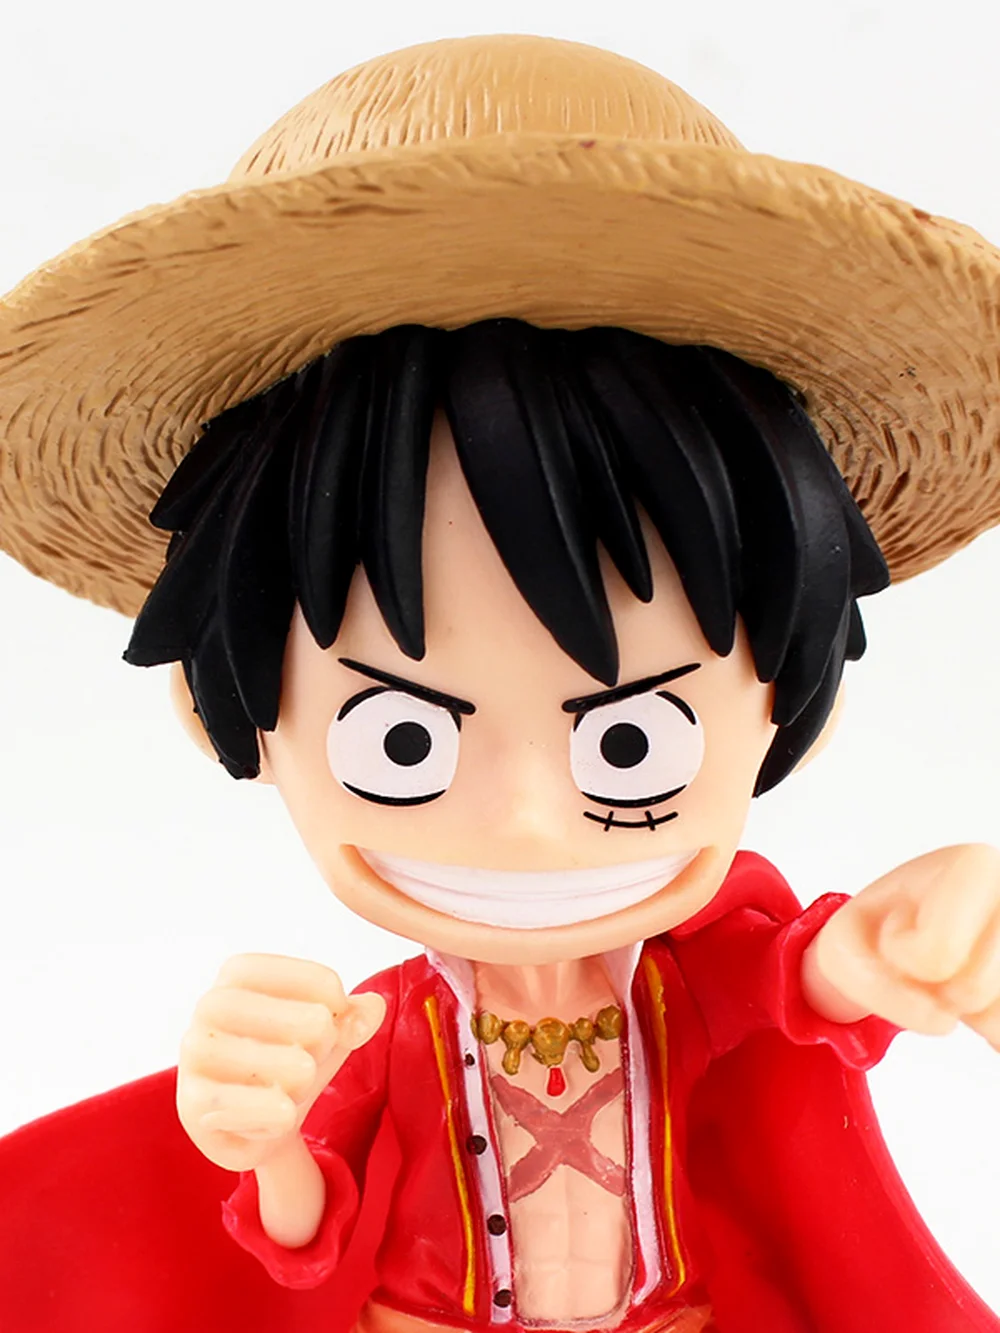 

15cm One Piece Monkey D Luffy 15th Anniversary Q Ver. Mini Action Figure PVC Collection Model Toy Doll